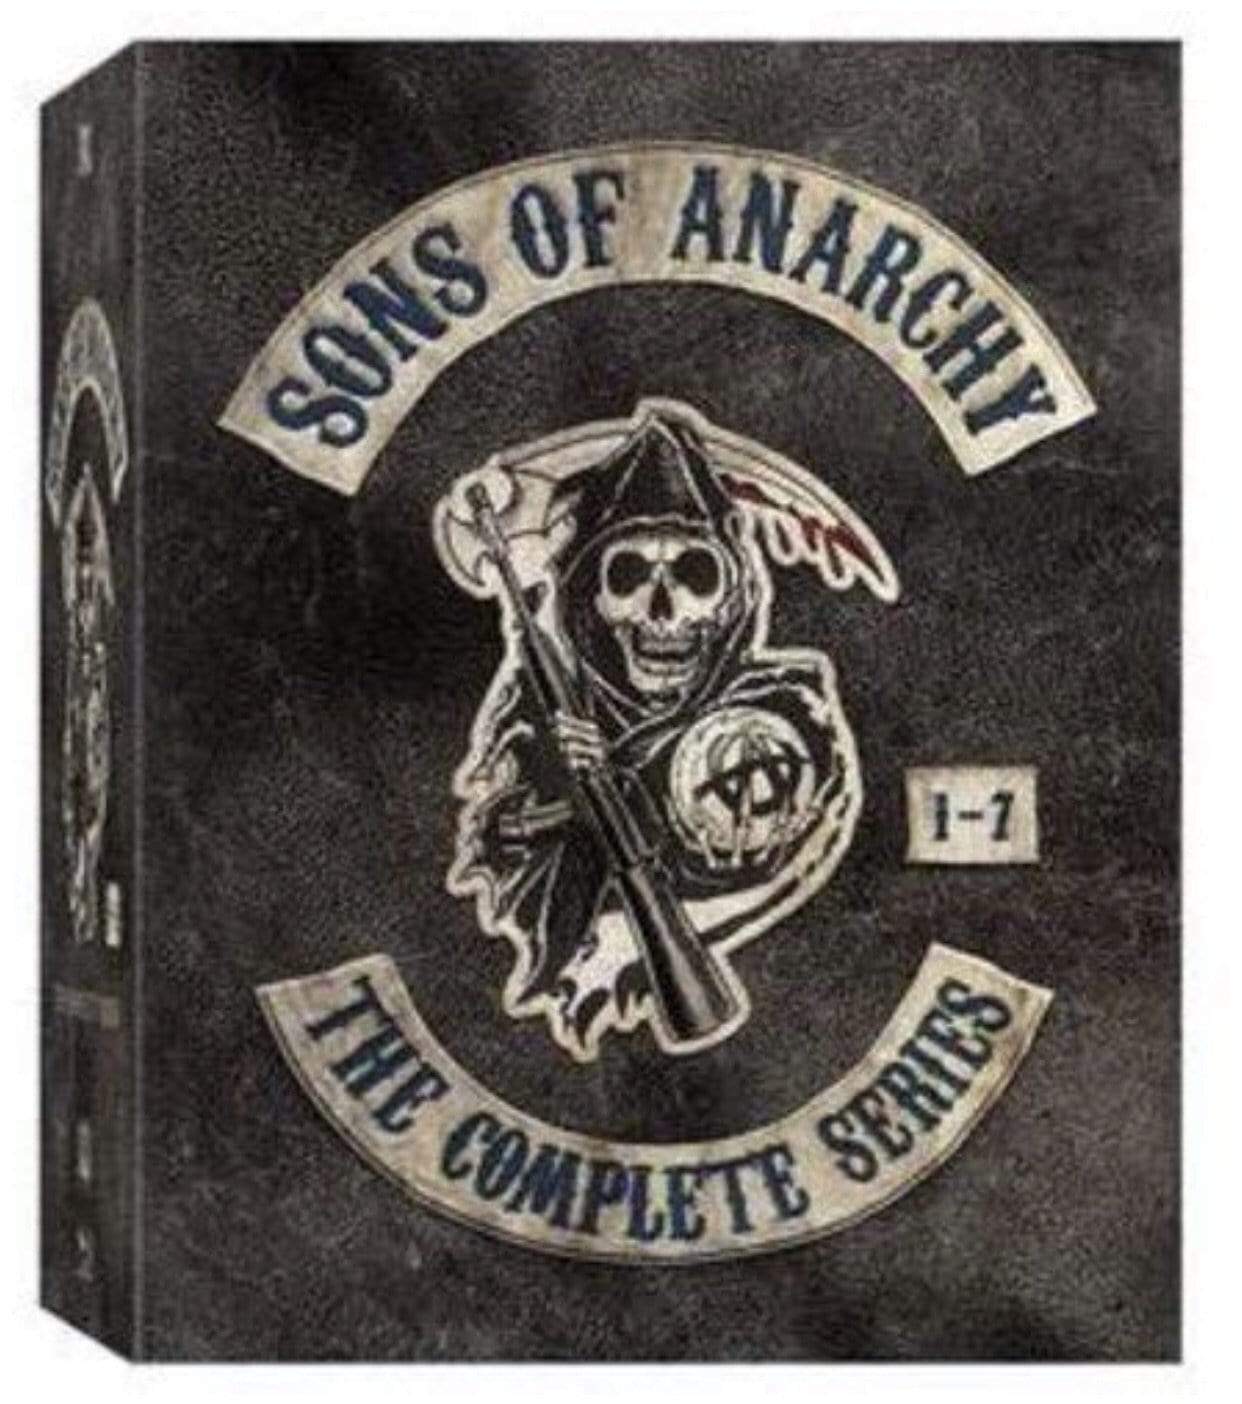 Sons of Anarchy DVD Complete Series 20th Century Fox DVDs & Blu-ray Discs > DVDs > Box Sets